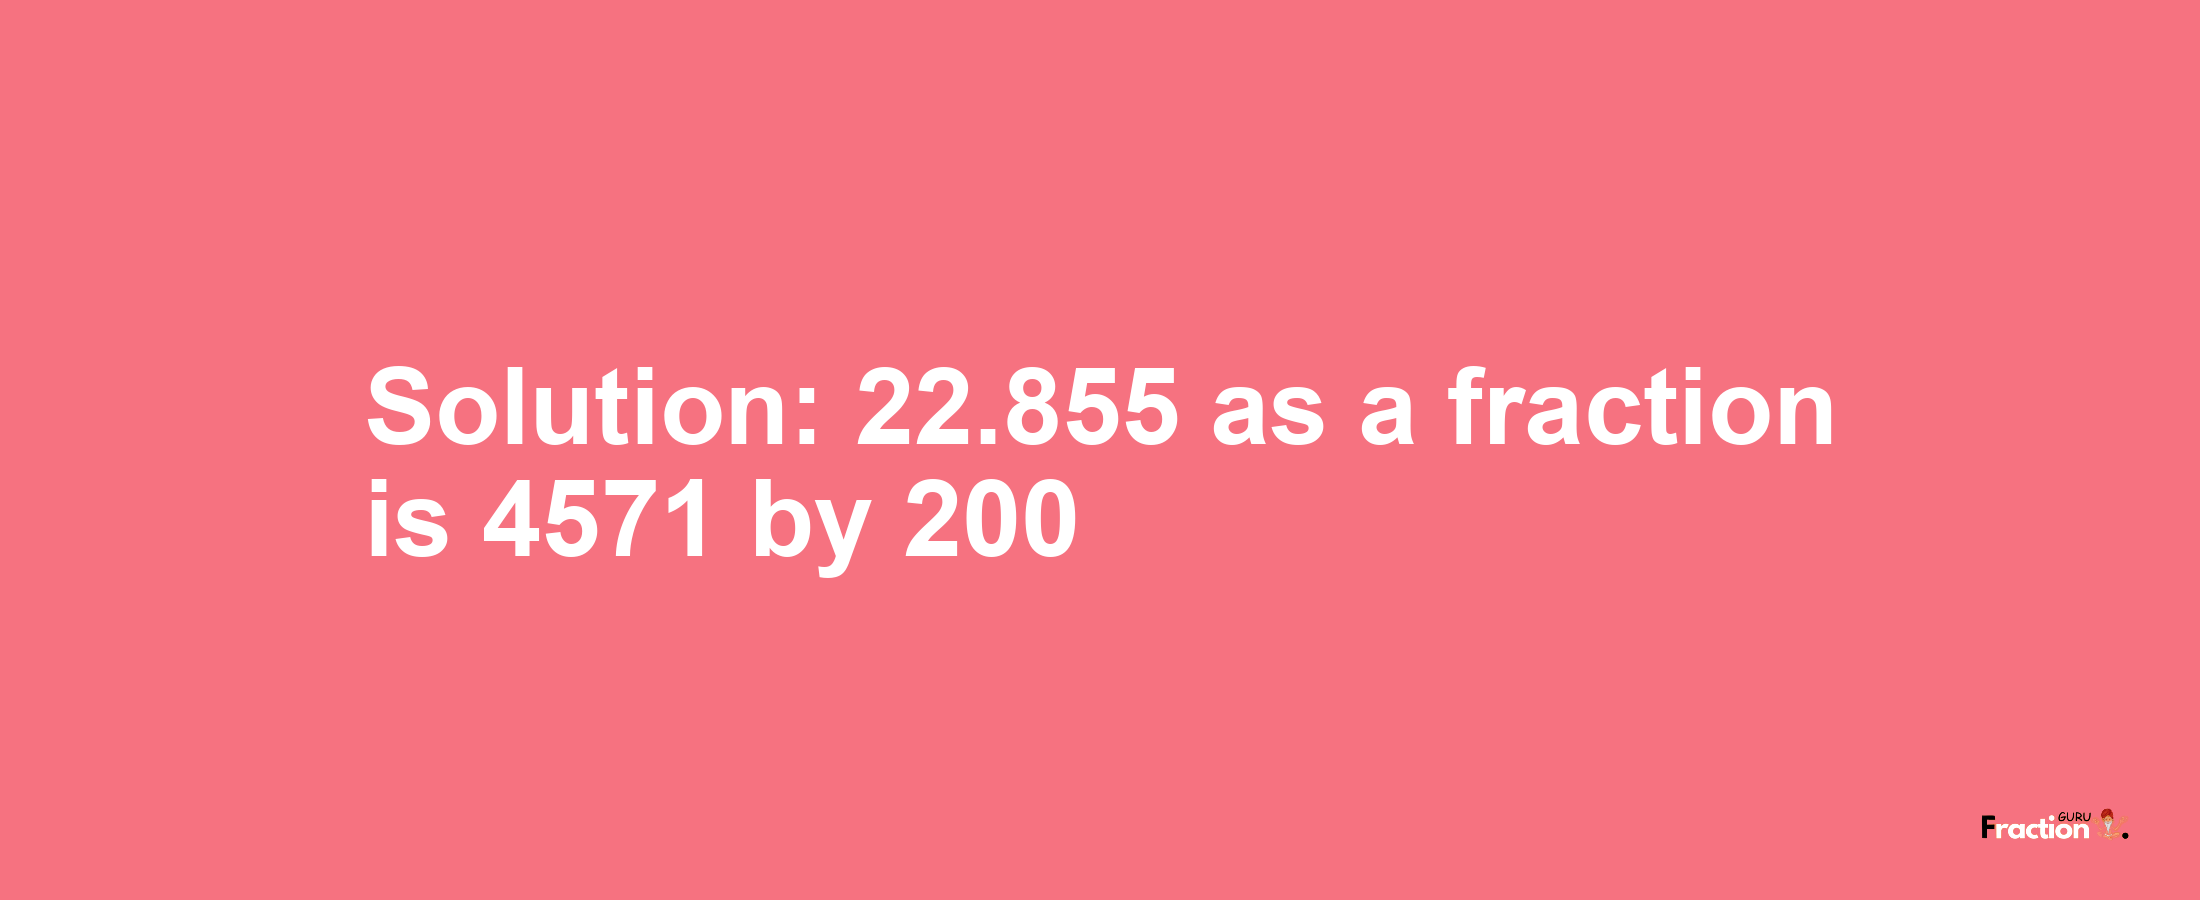 Solution:22.855 as a fraction is 4571/200